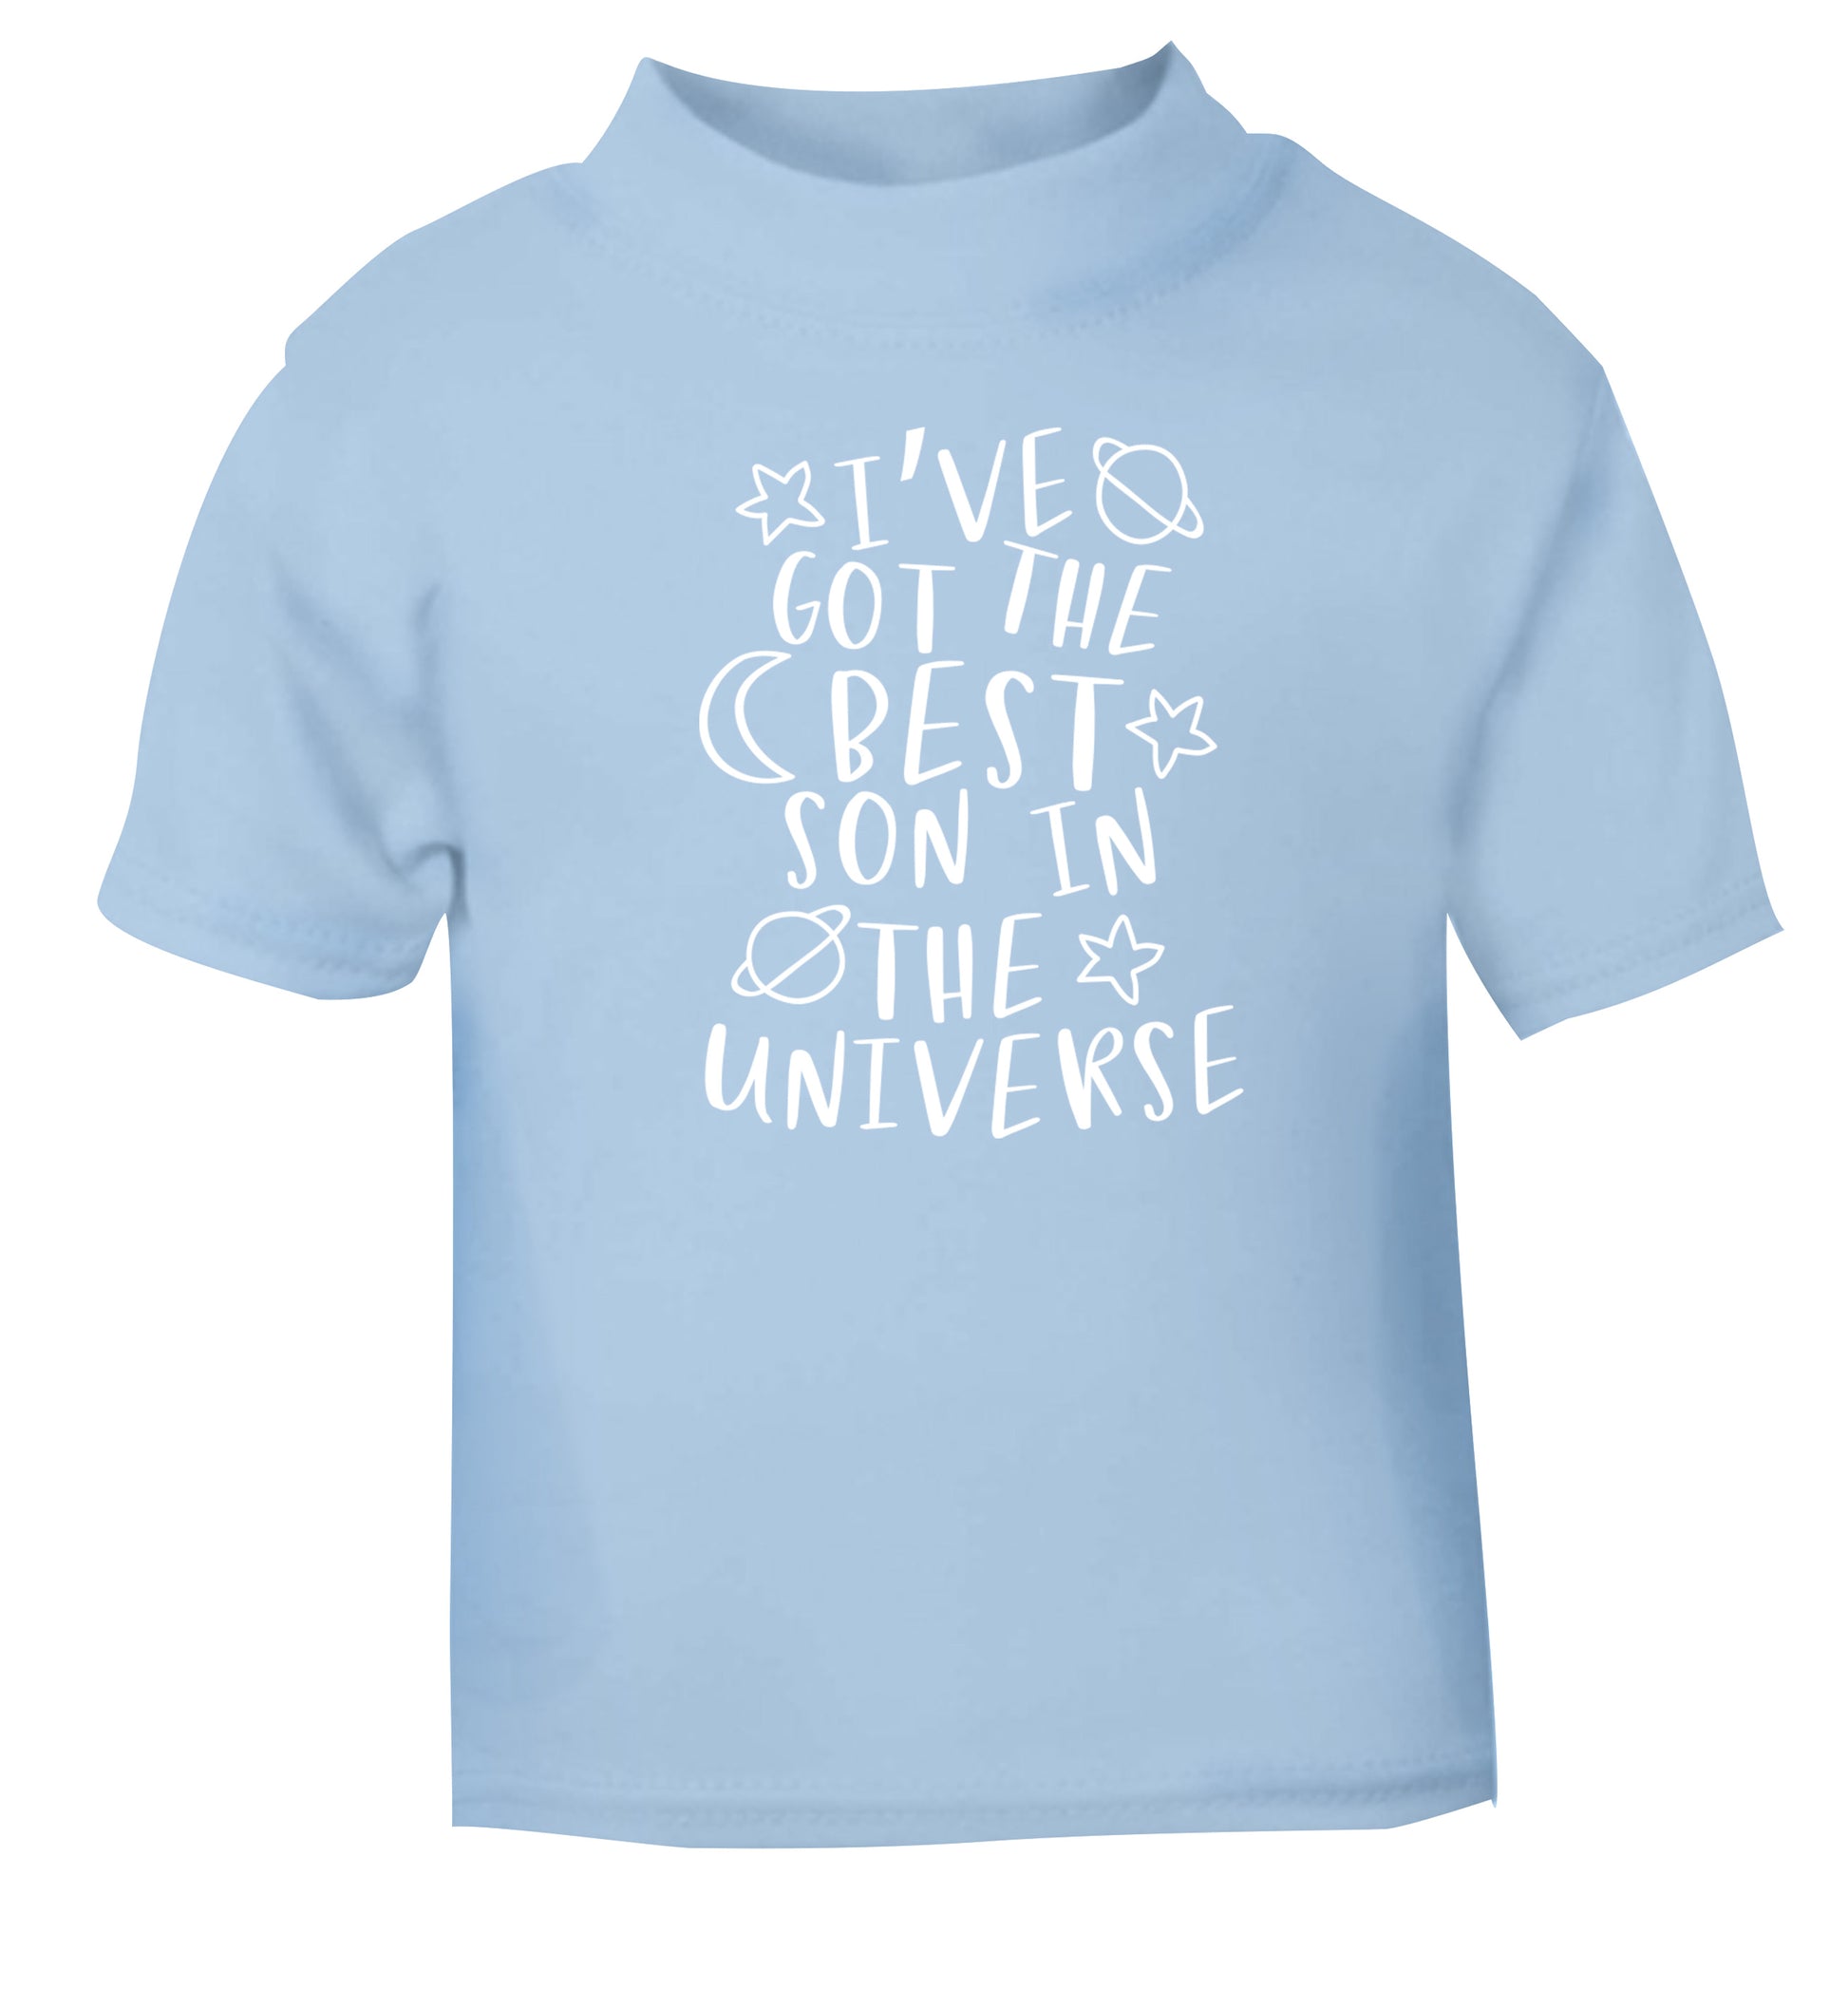 I've got the best son in the universe light blue Baby Toddler Tshirt 2 Years